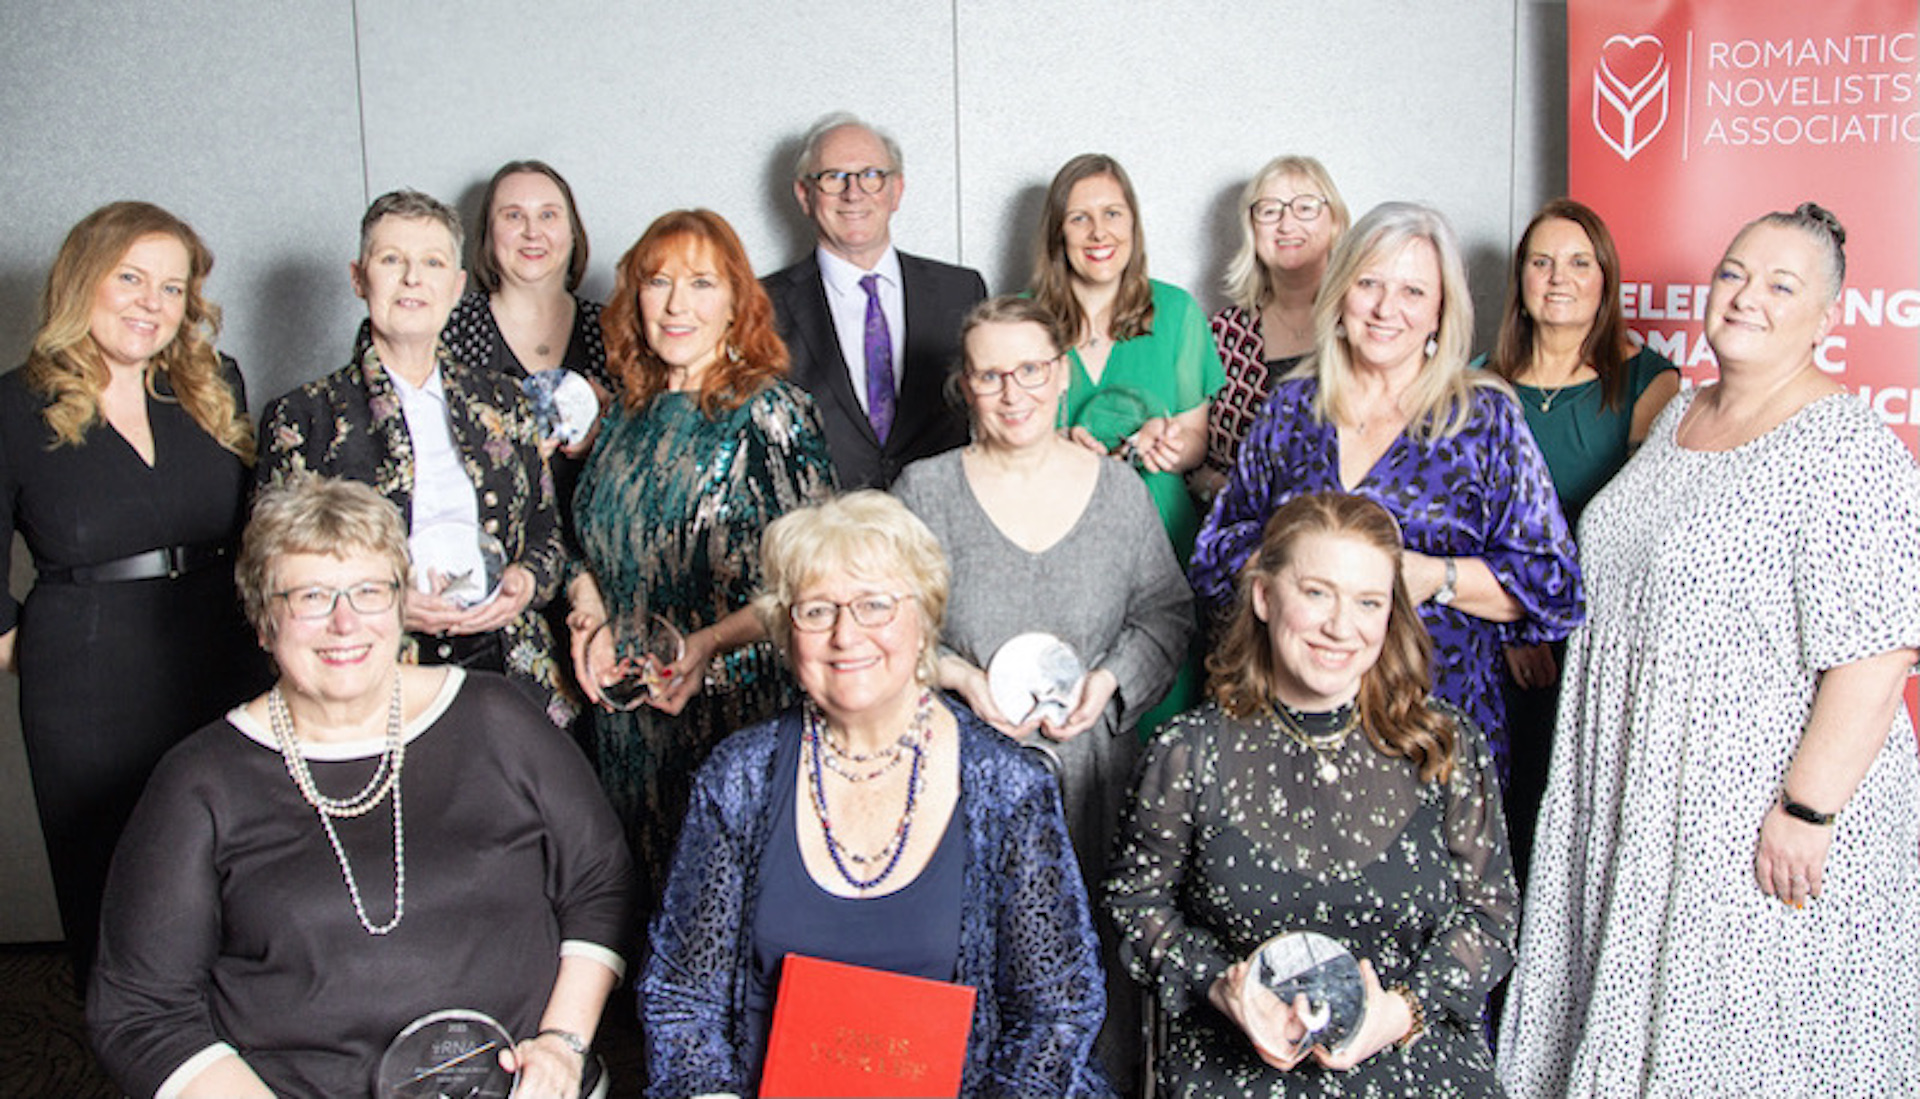 RNA Romantic Novel Awards 2023 winners, with RNA Chair, RNA awards organiser, awards sponsors (including Katie Fforde) and presenters. Photo credit: Camilo Queipo Photography